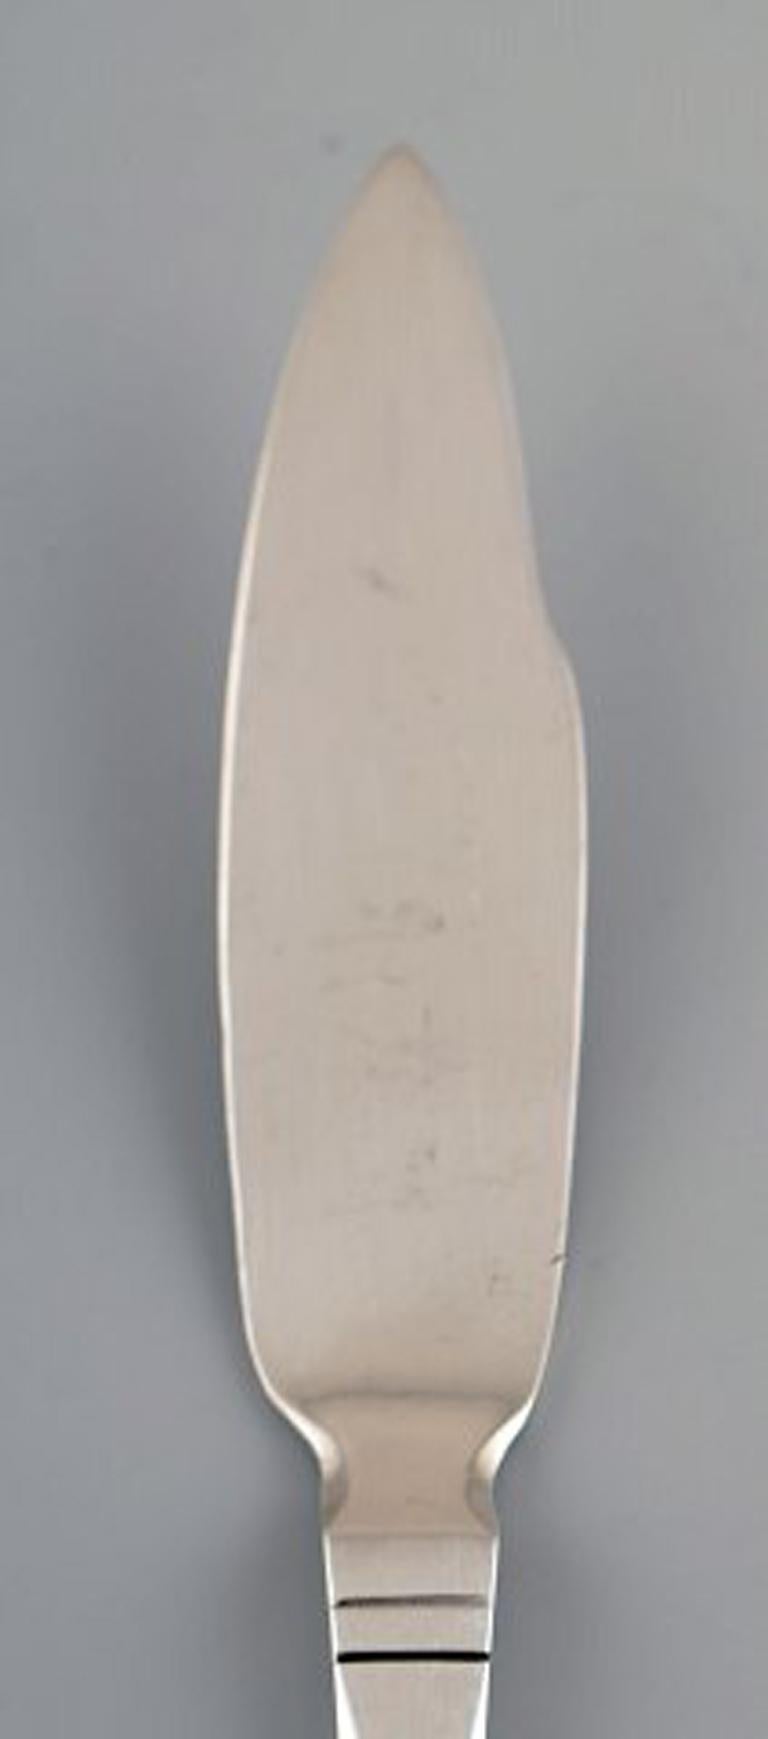 Georg Jensen. Continental fish knife, silverware, hand-hammered.
The cutlery is designed by Georg Jensen in 1906.
In perfect condition.
Measures: 20 cm.